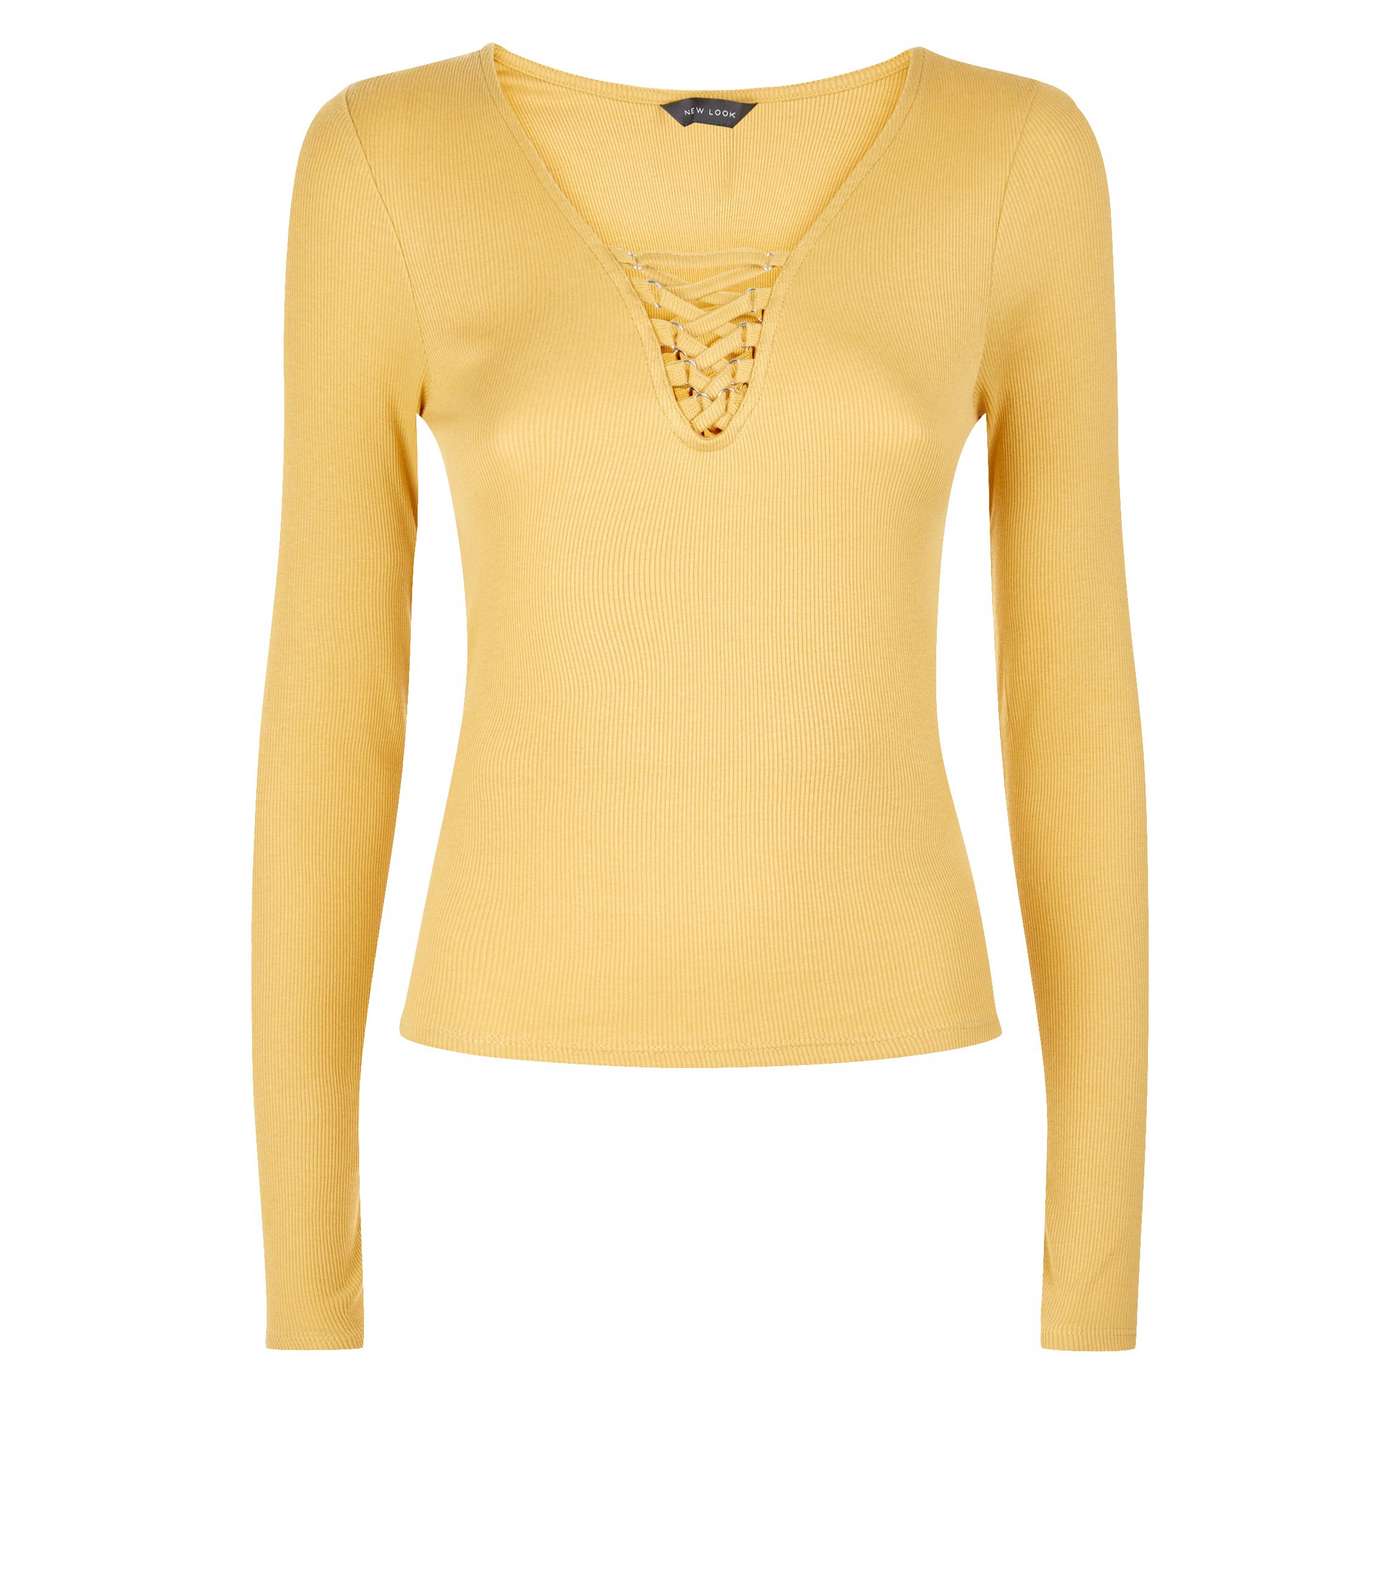 Mustard Yellow Lace-Up Neck Long Sleeve Top Image 4